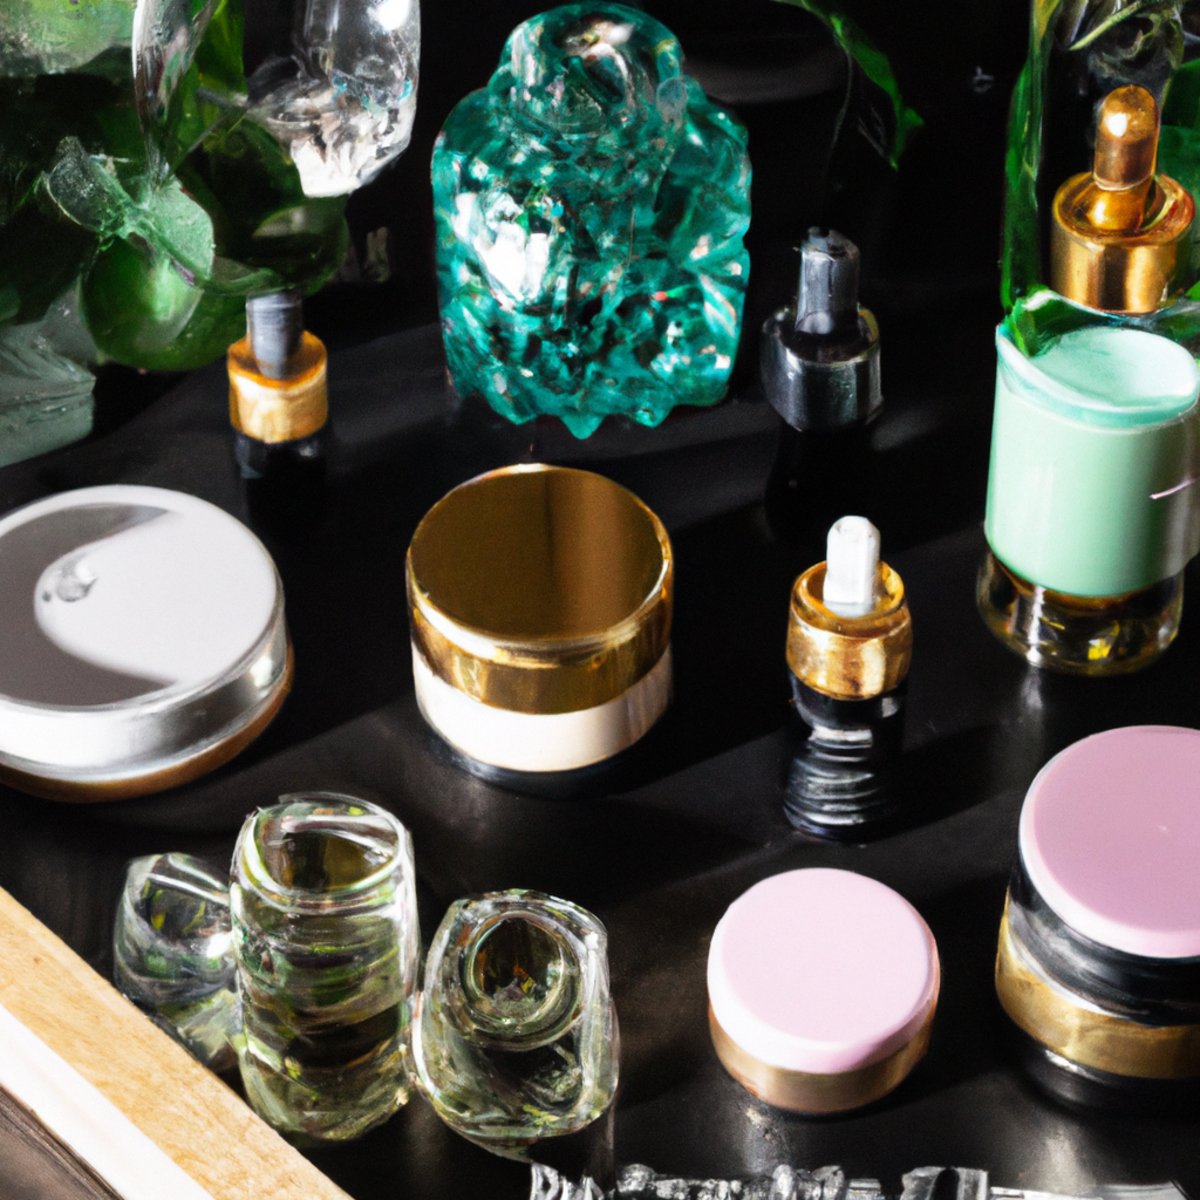 Luxurious vanity table with CBD-infused skincare products, elegantly arranged glass jars and bottles, exuding sophistication and elegance.